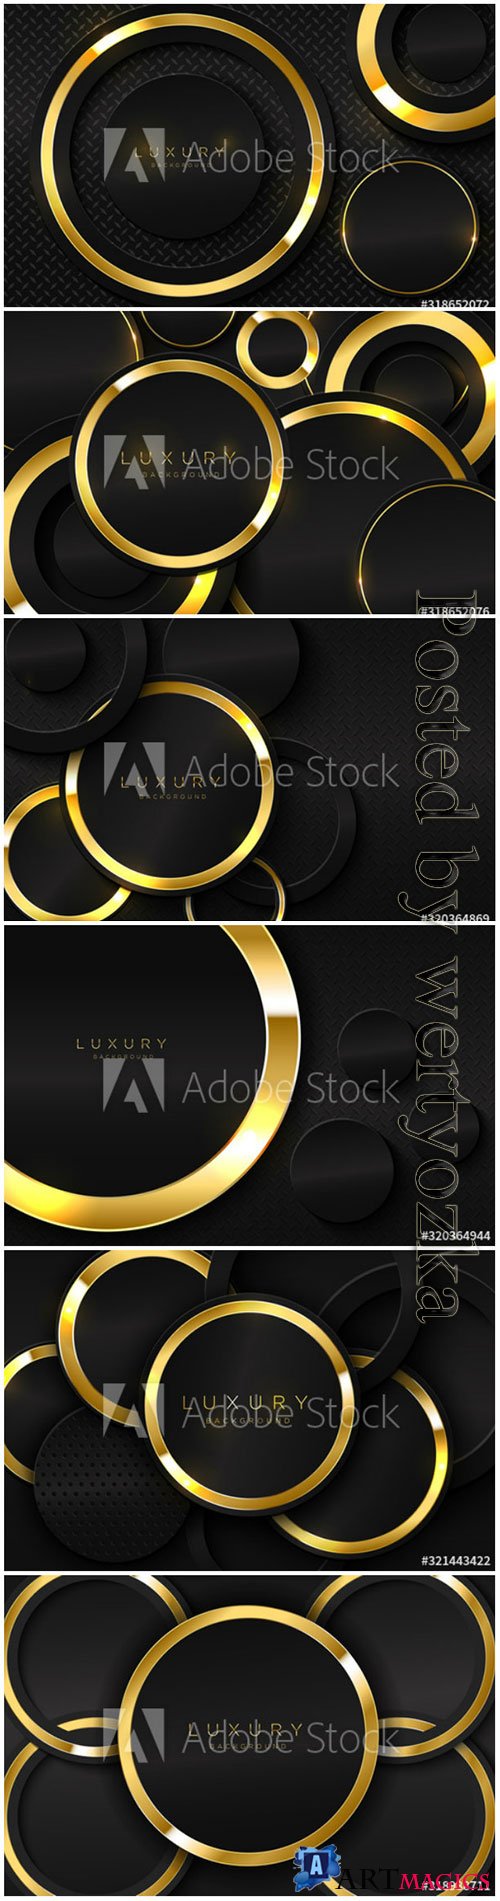 Realistic background with shiny gold ring shape